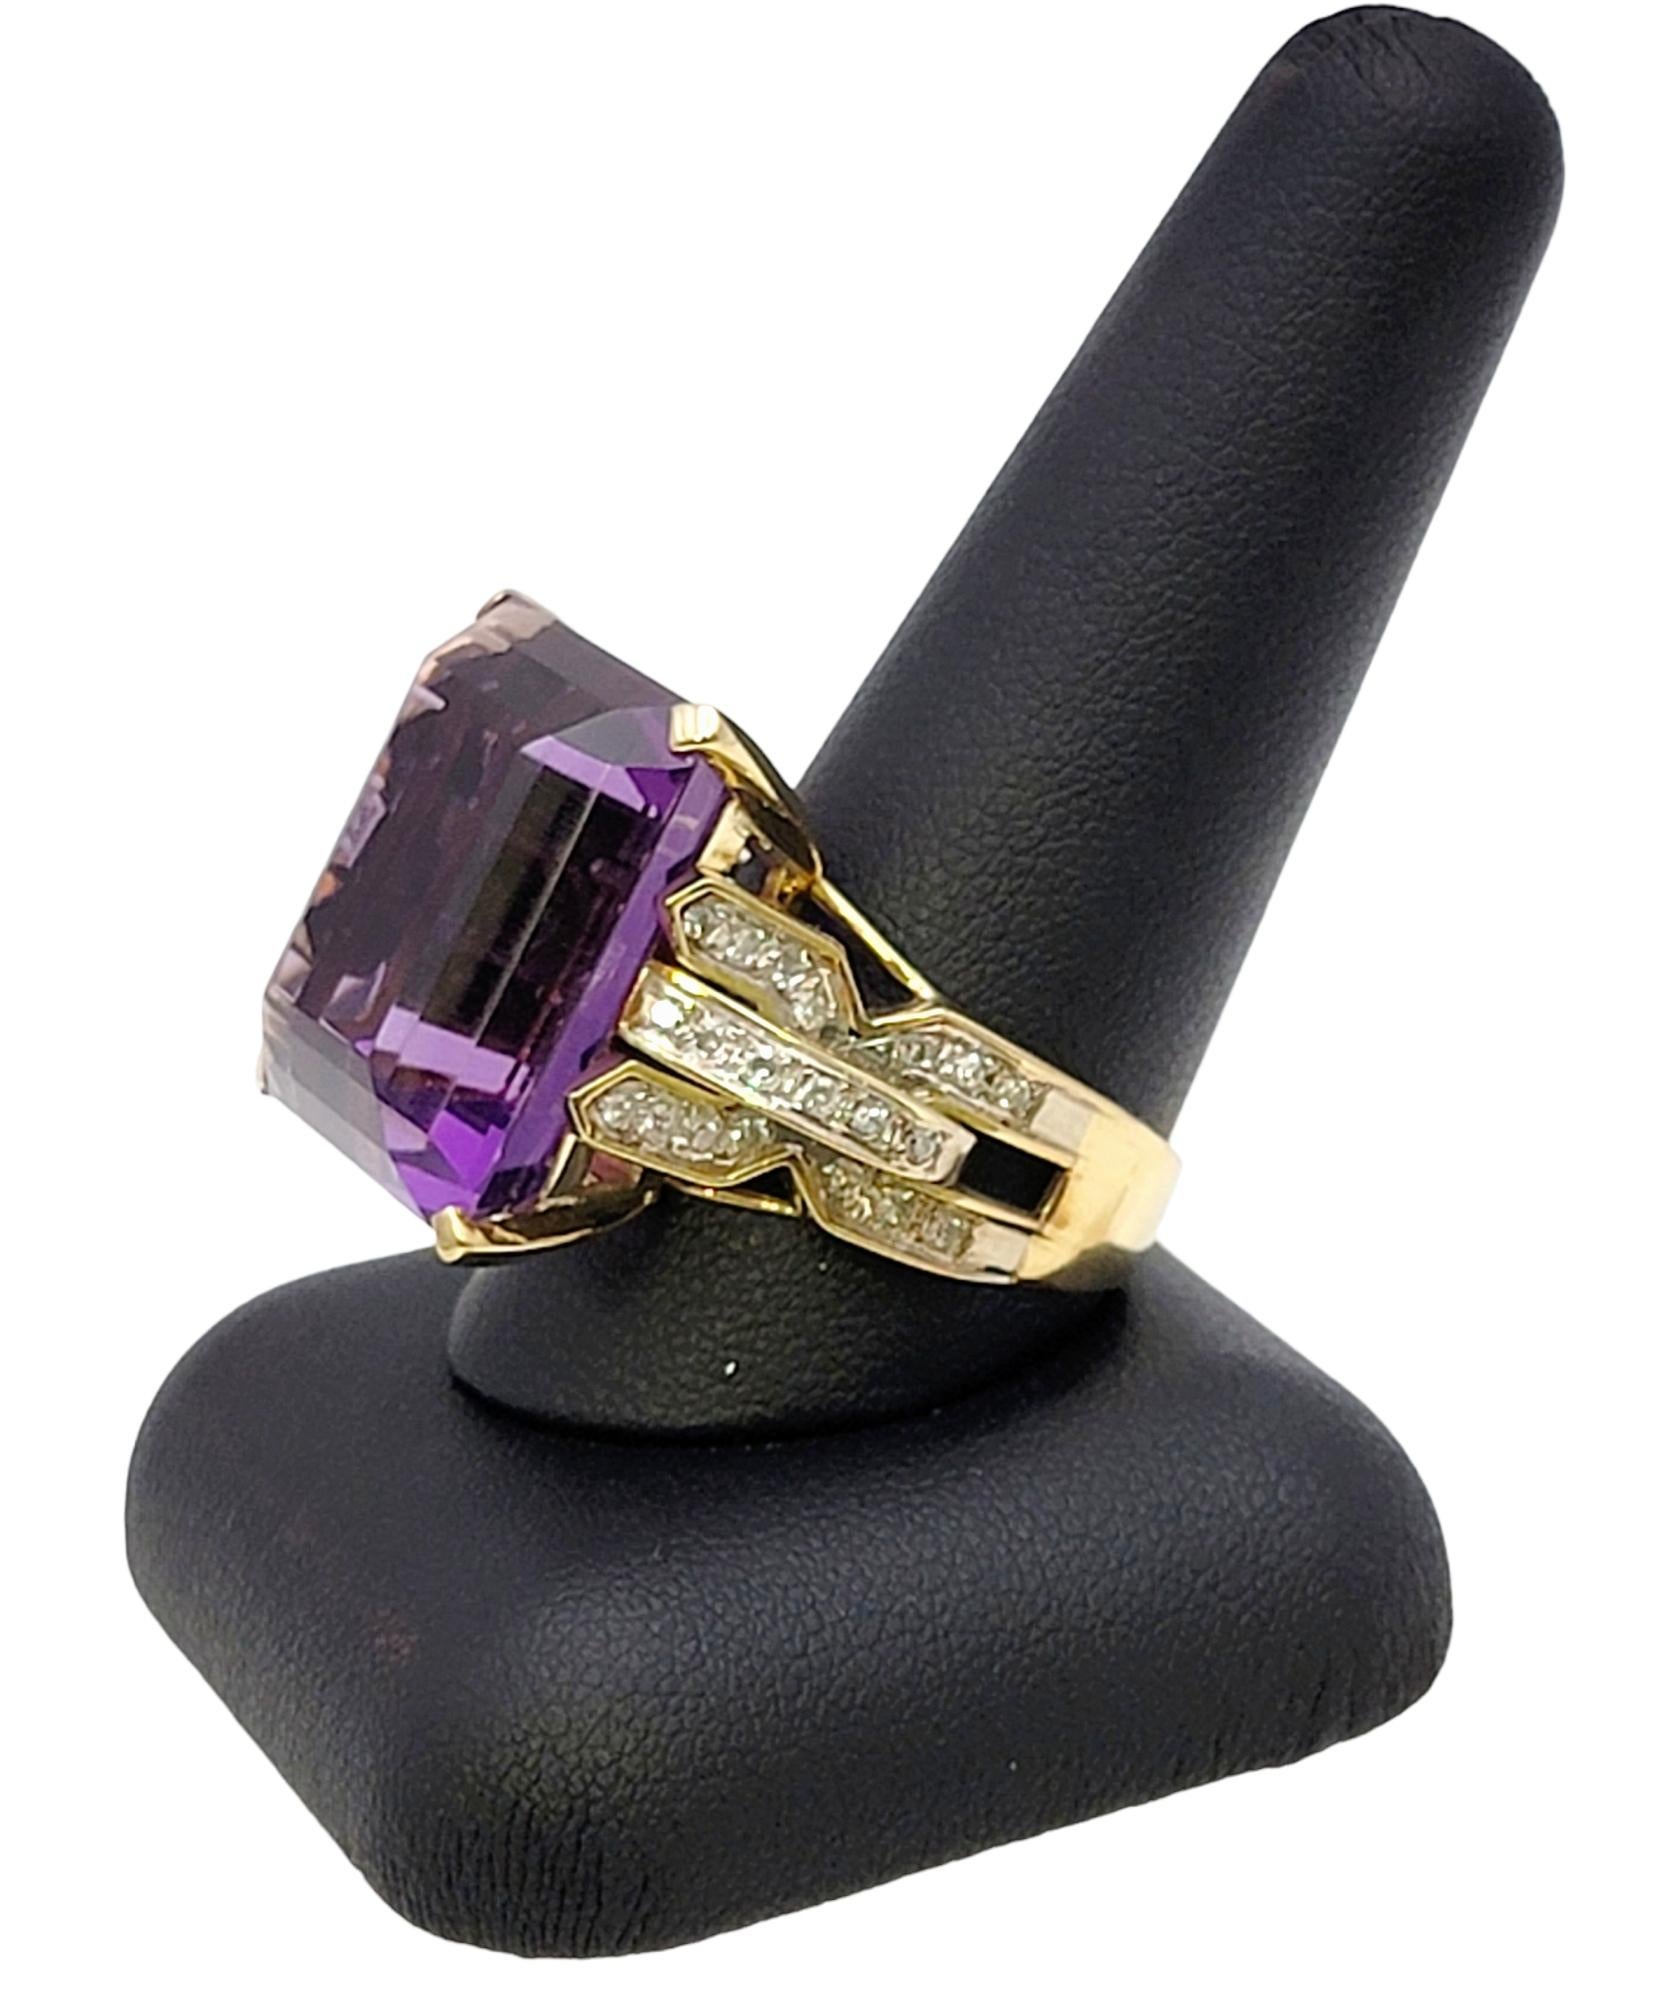 Huge 34.85 Carat Emerald Cut Amethyst Cocktail Ring with Side Diamond Detailing For Sale 10